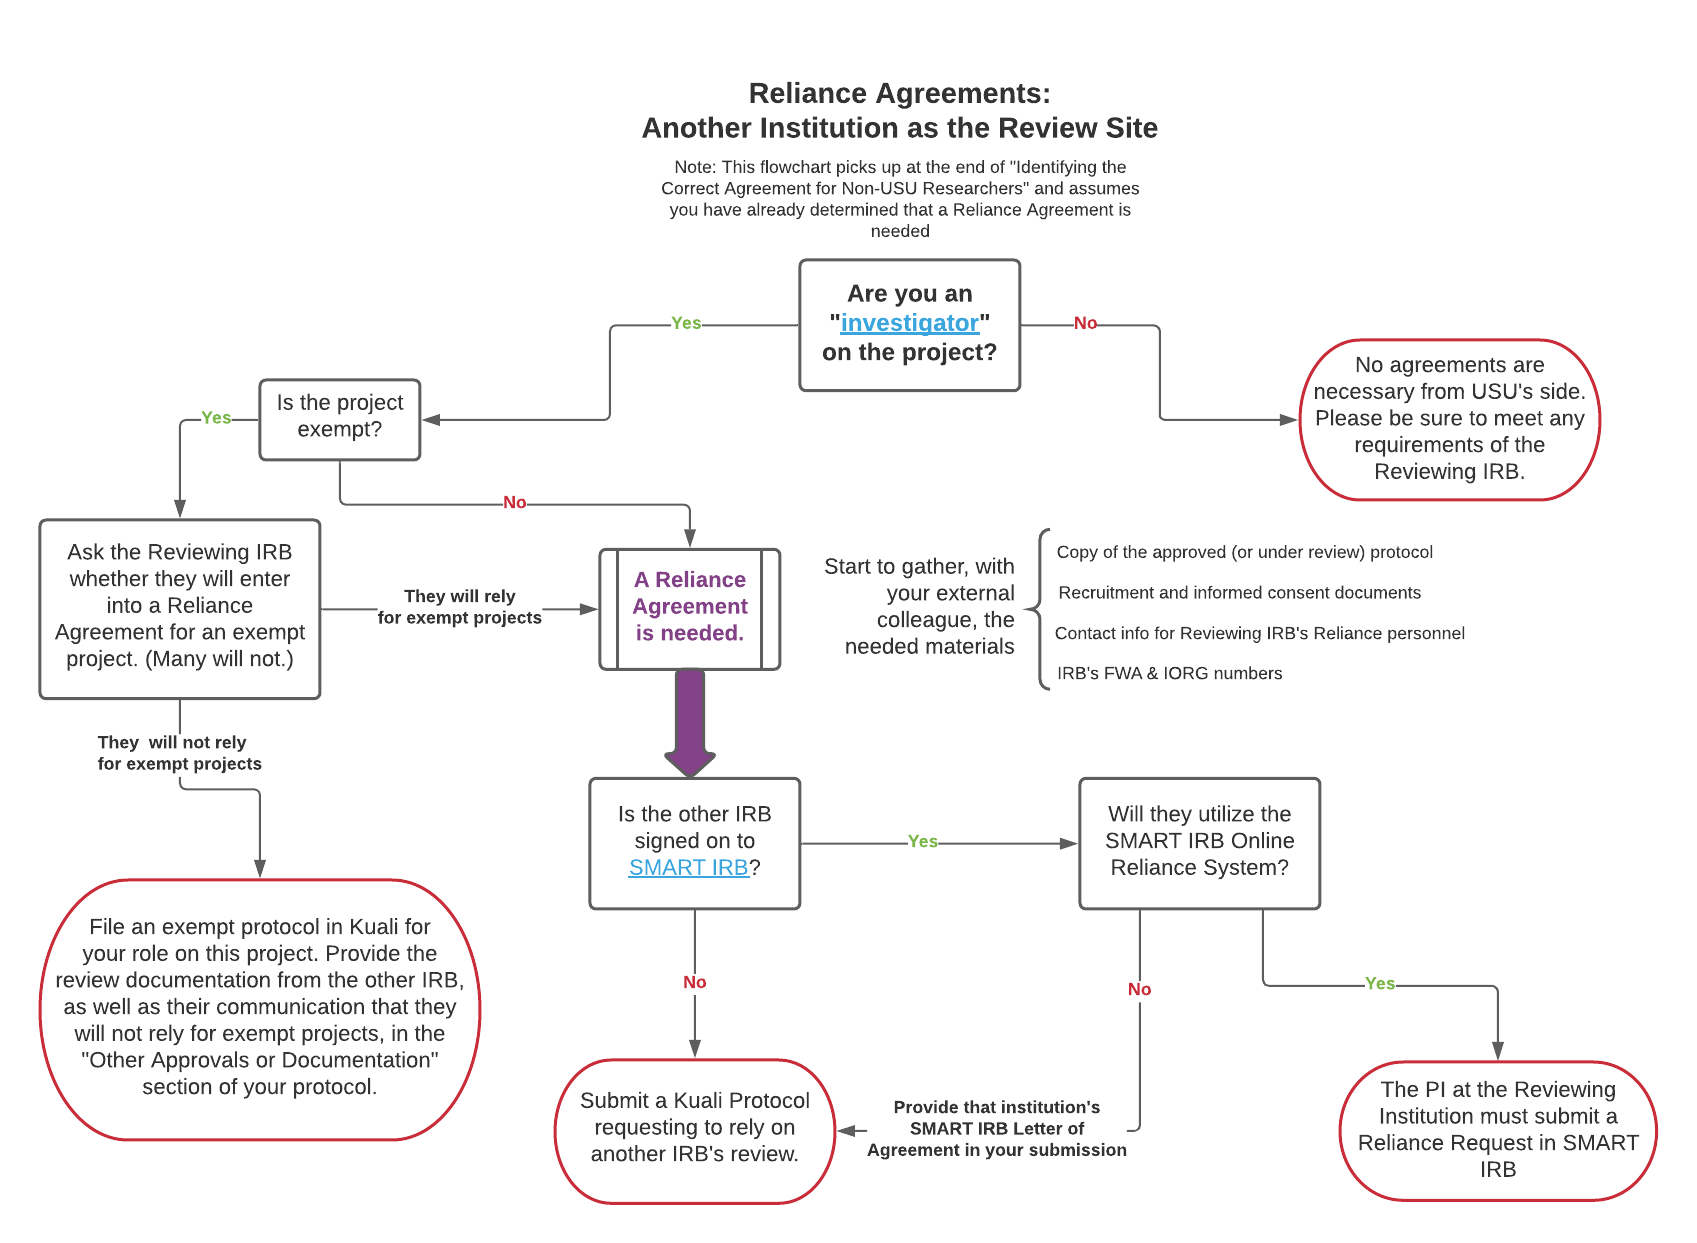 Reliance Agreements--Another Institution as the Review Site flow chart: please call 435-797-1821 to get alternative access to the image content